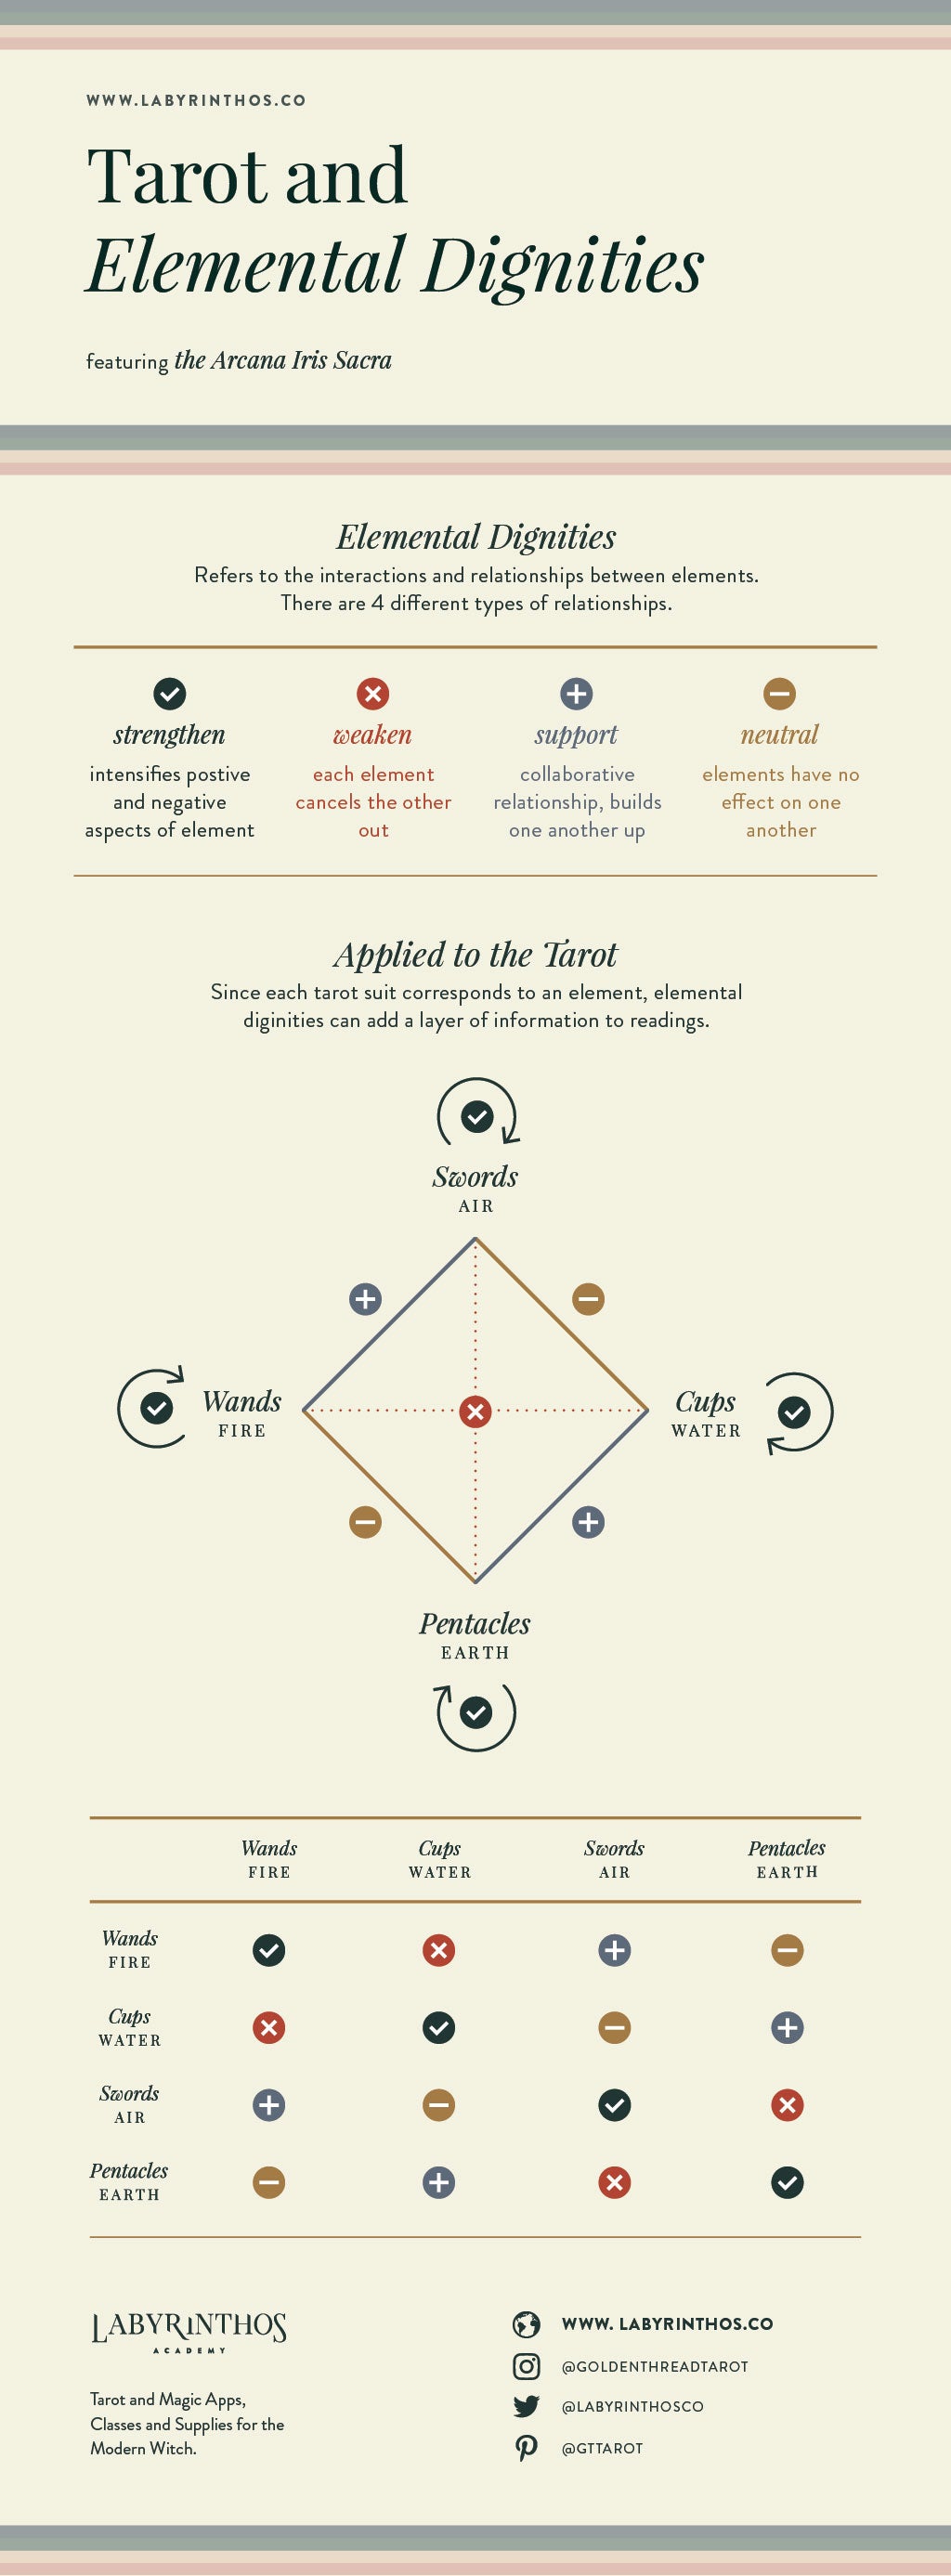 tarot elements: elemental diginities and how they apply to tarot infographic